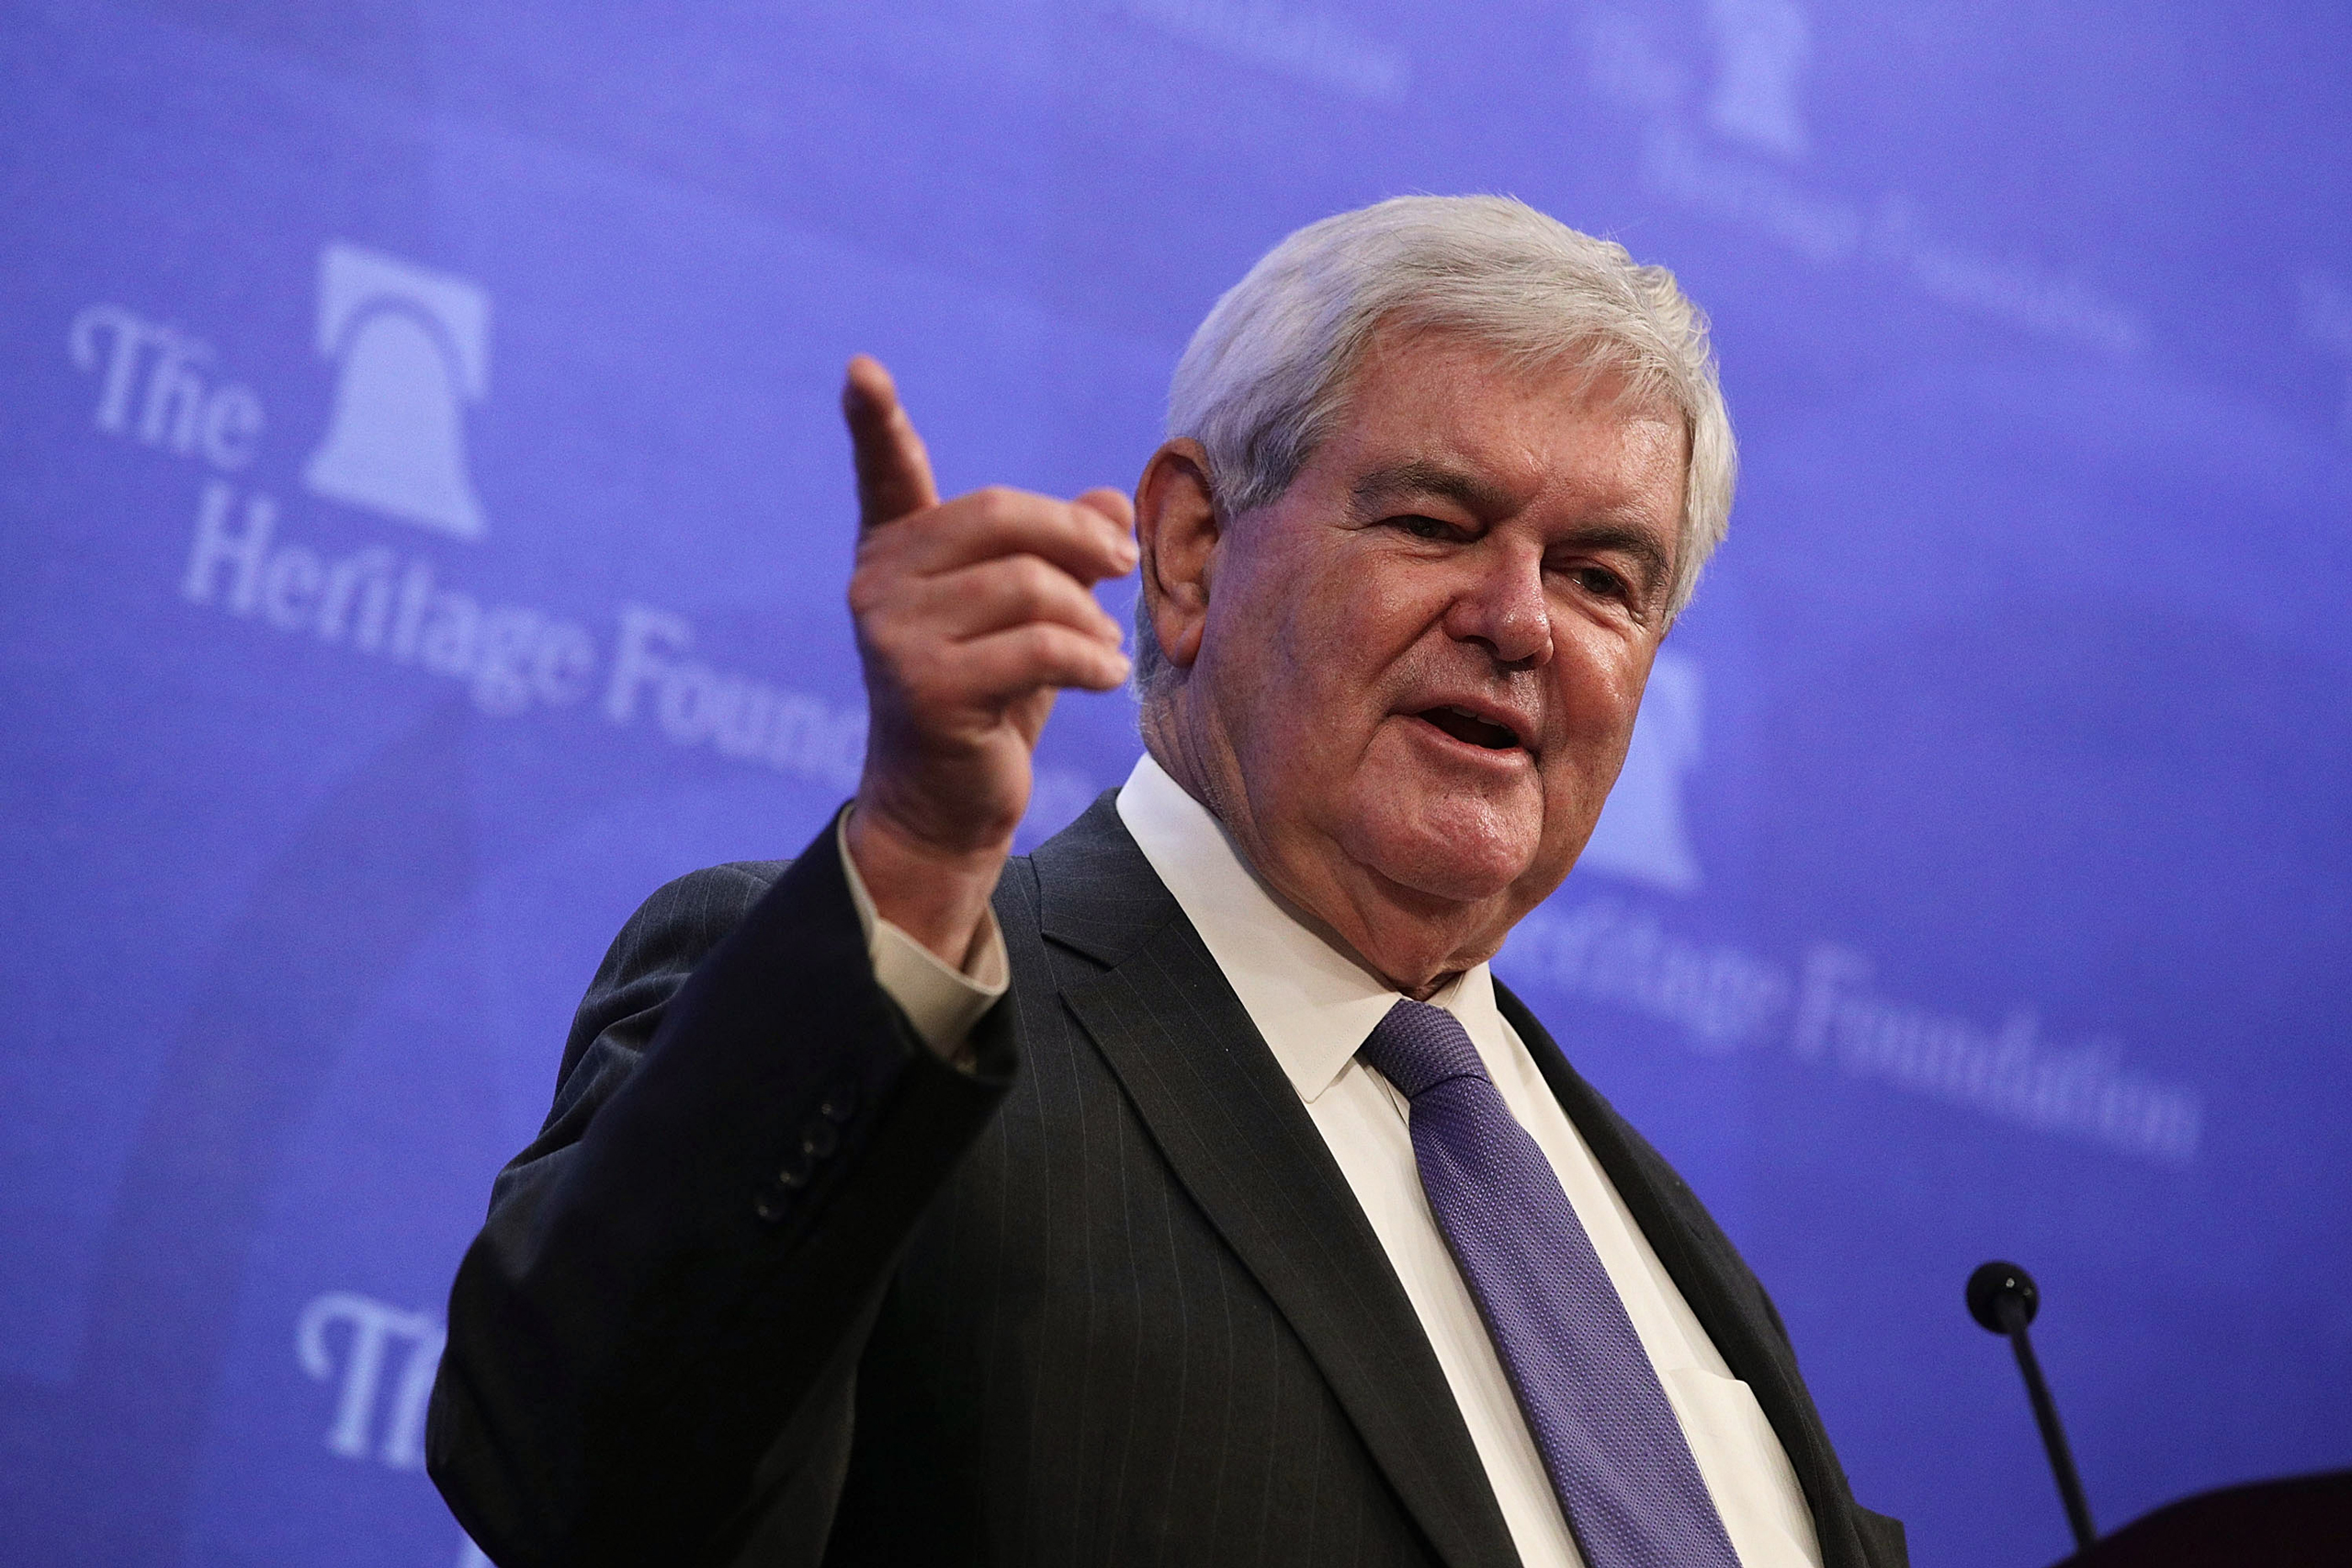 Former U.S. Speaker of the House Newt Gingrich speaks during a discussion at the Heritage Foundation in Washington on Dec. 13, 2016. (Alex Wong—Getty Images)